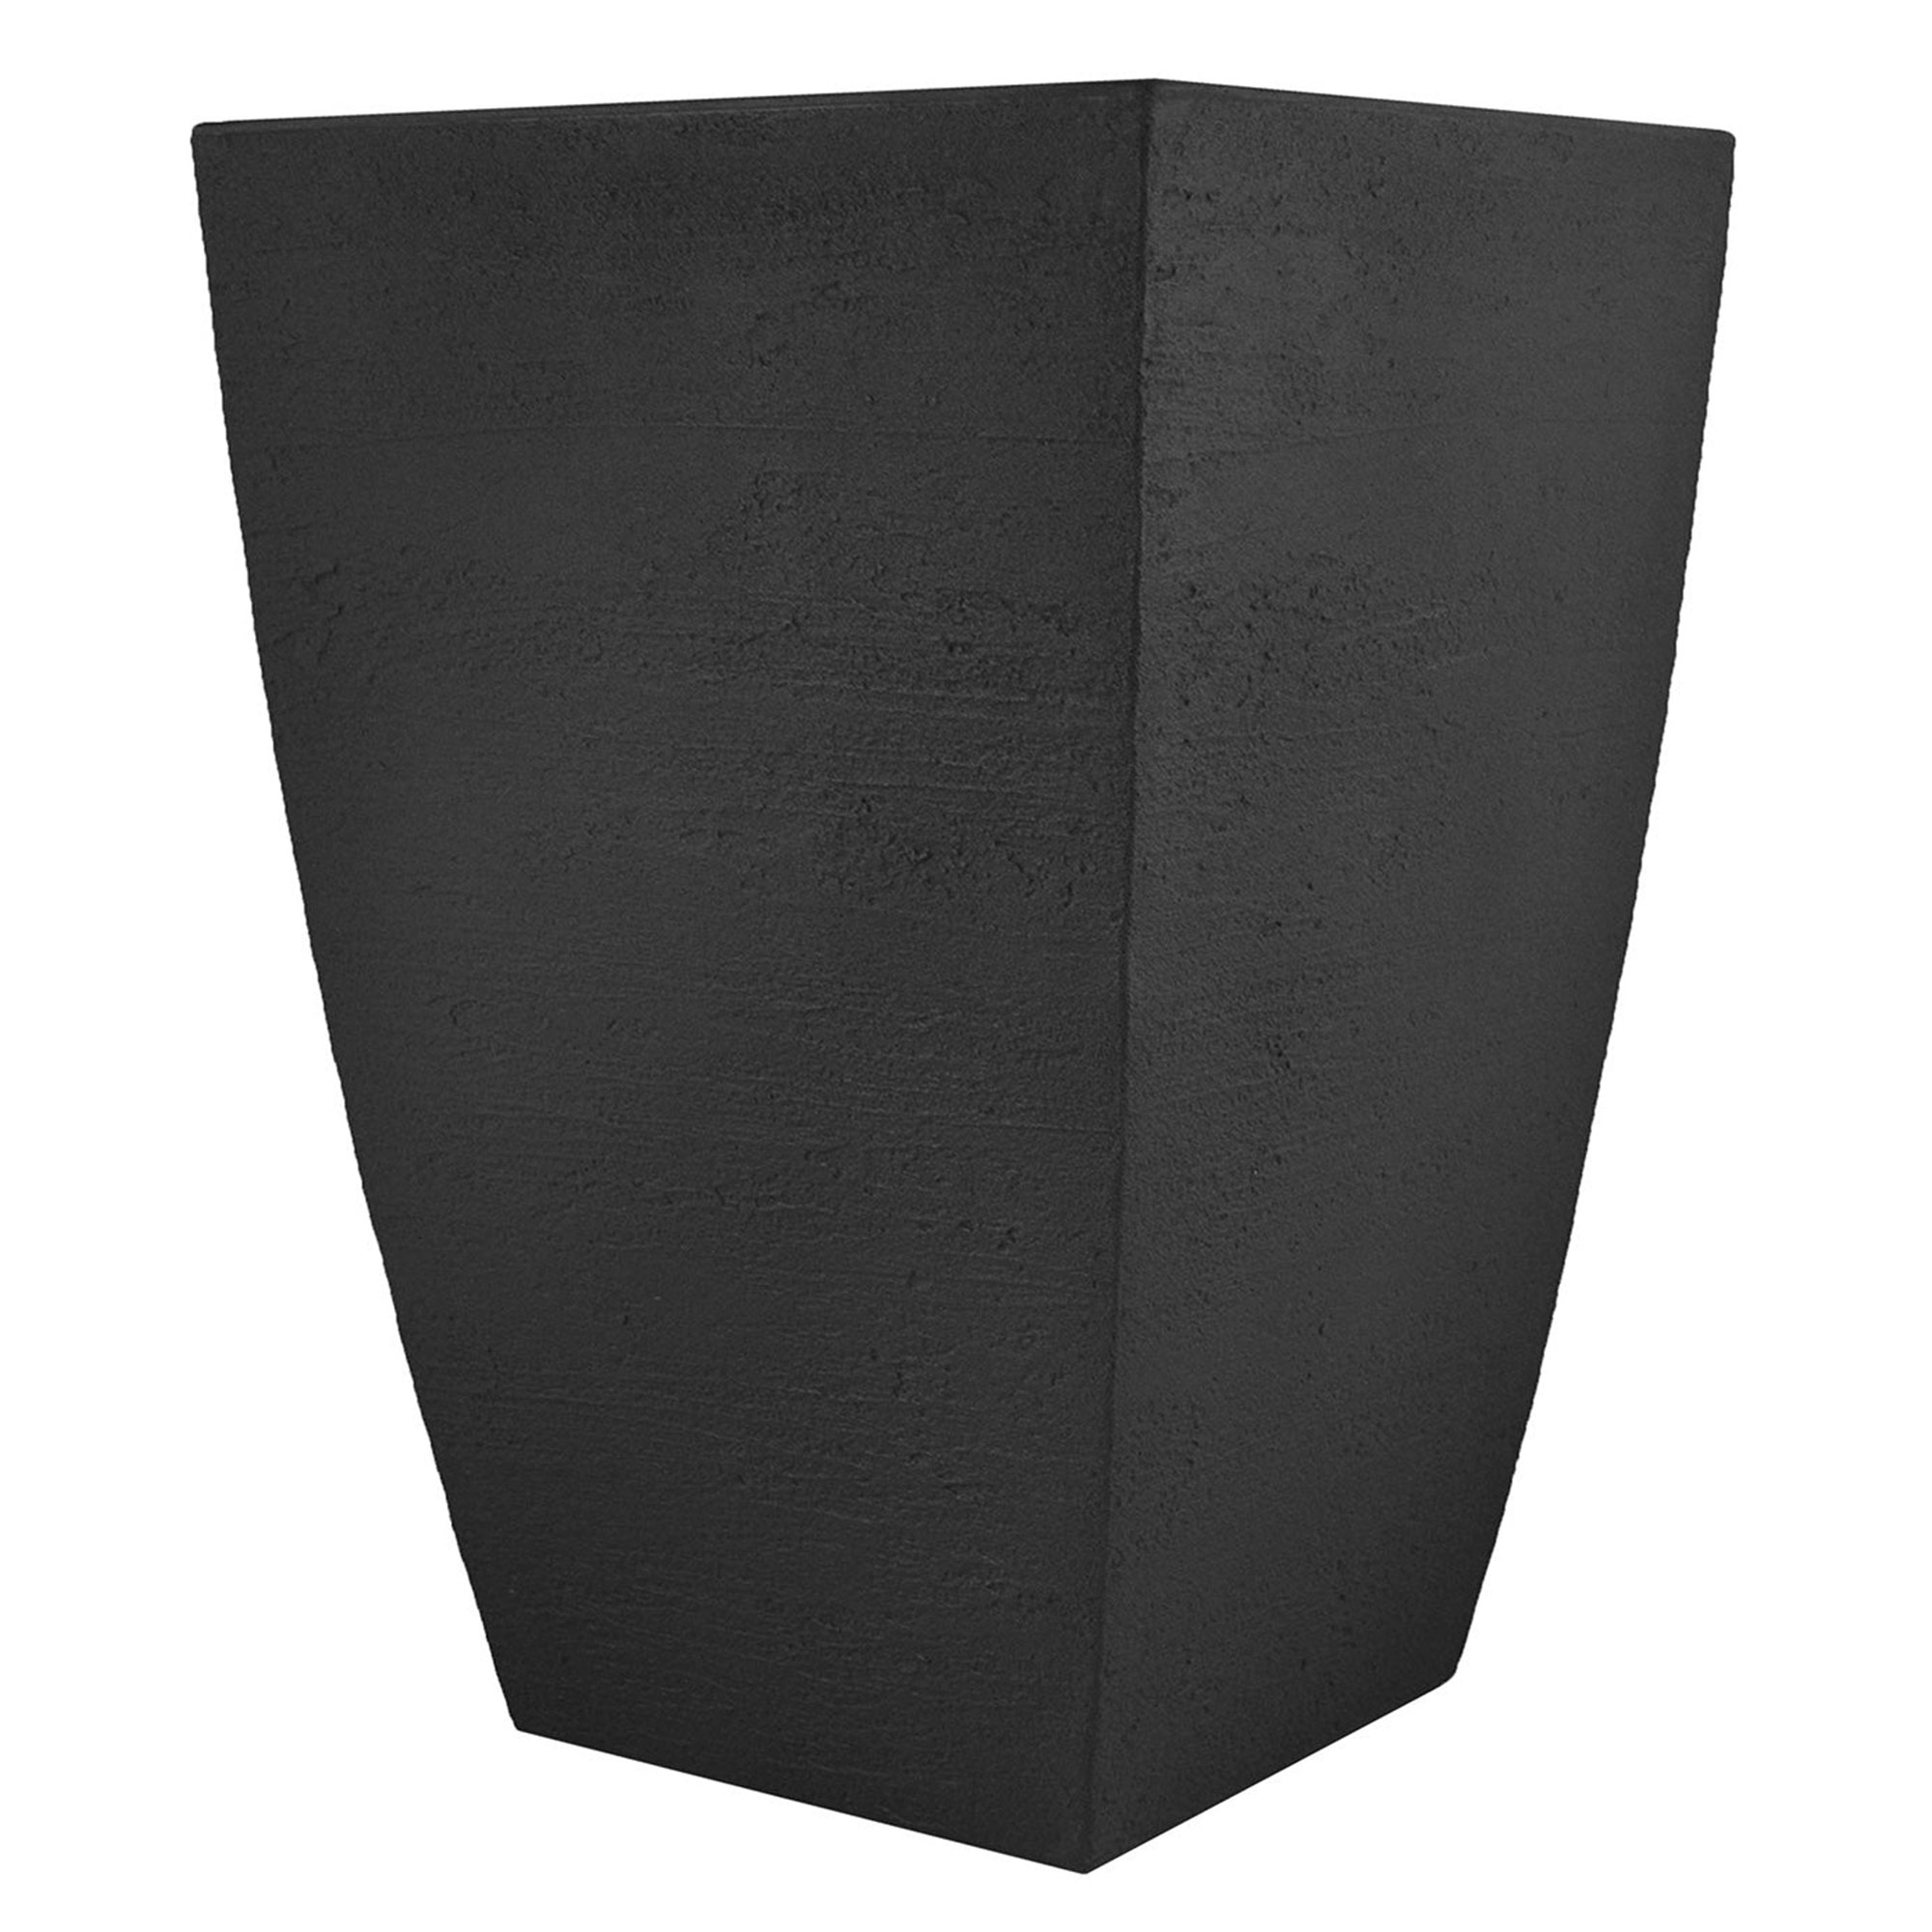 Tusco Products Modern 19 Inch Molded Plastic Square Planter, Black - image 1 of 5